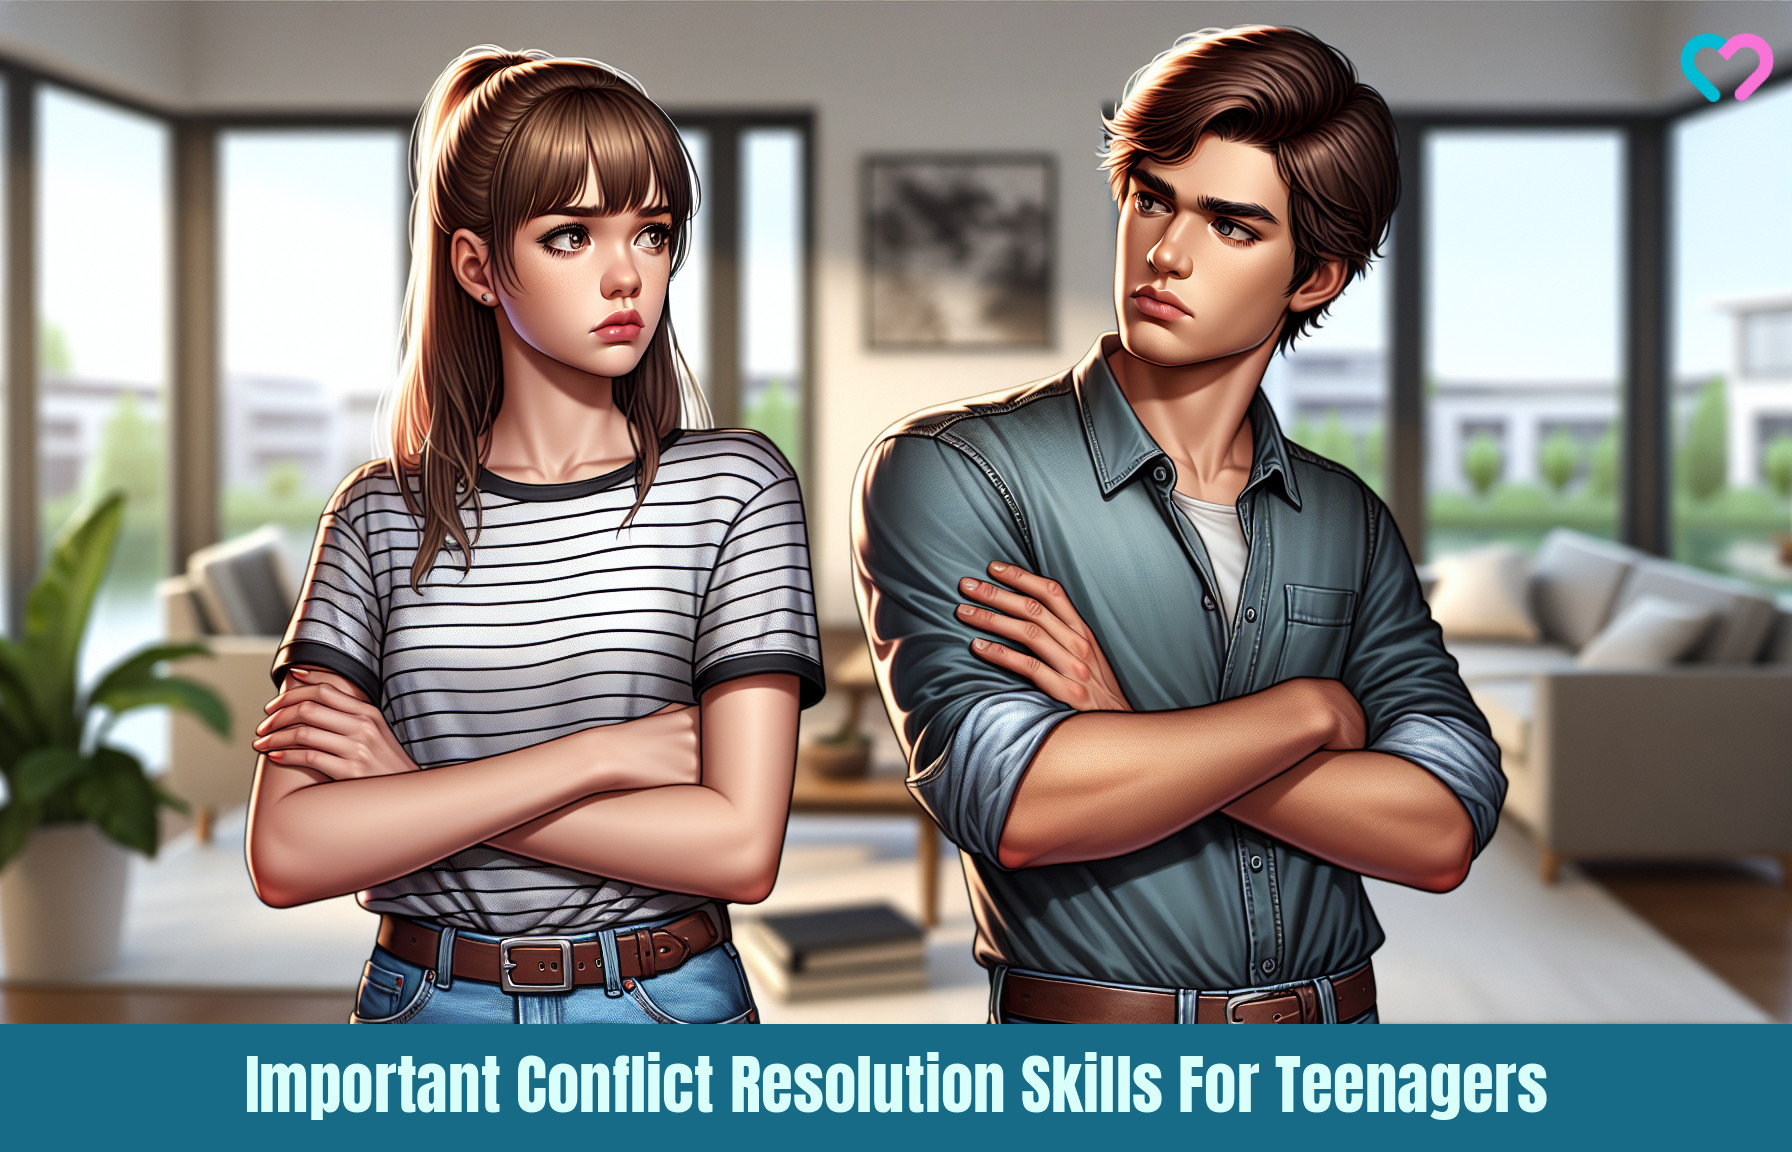 Conflict Resolution Skills For Teenagers_illustration